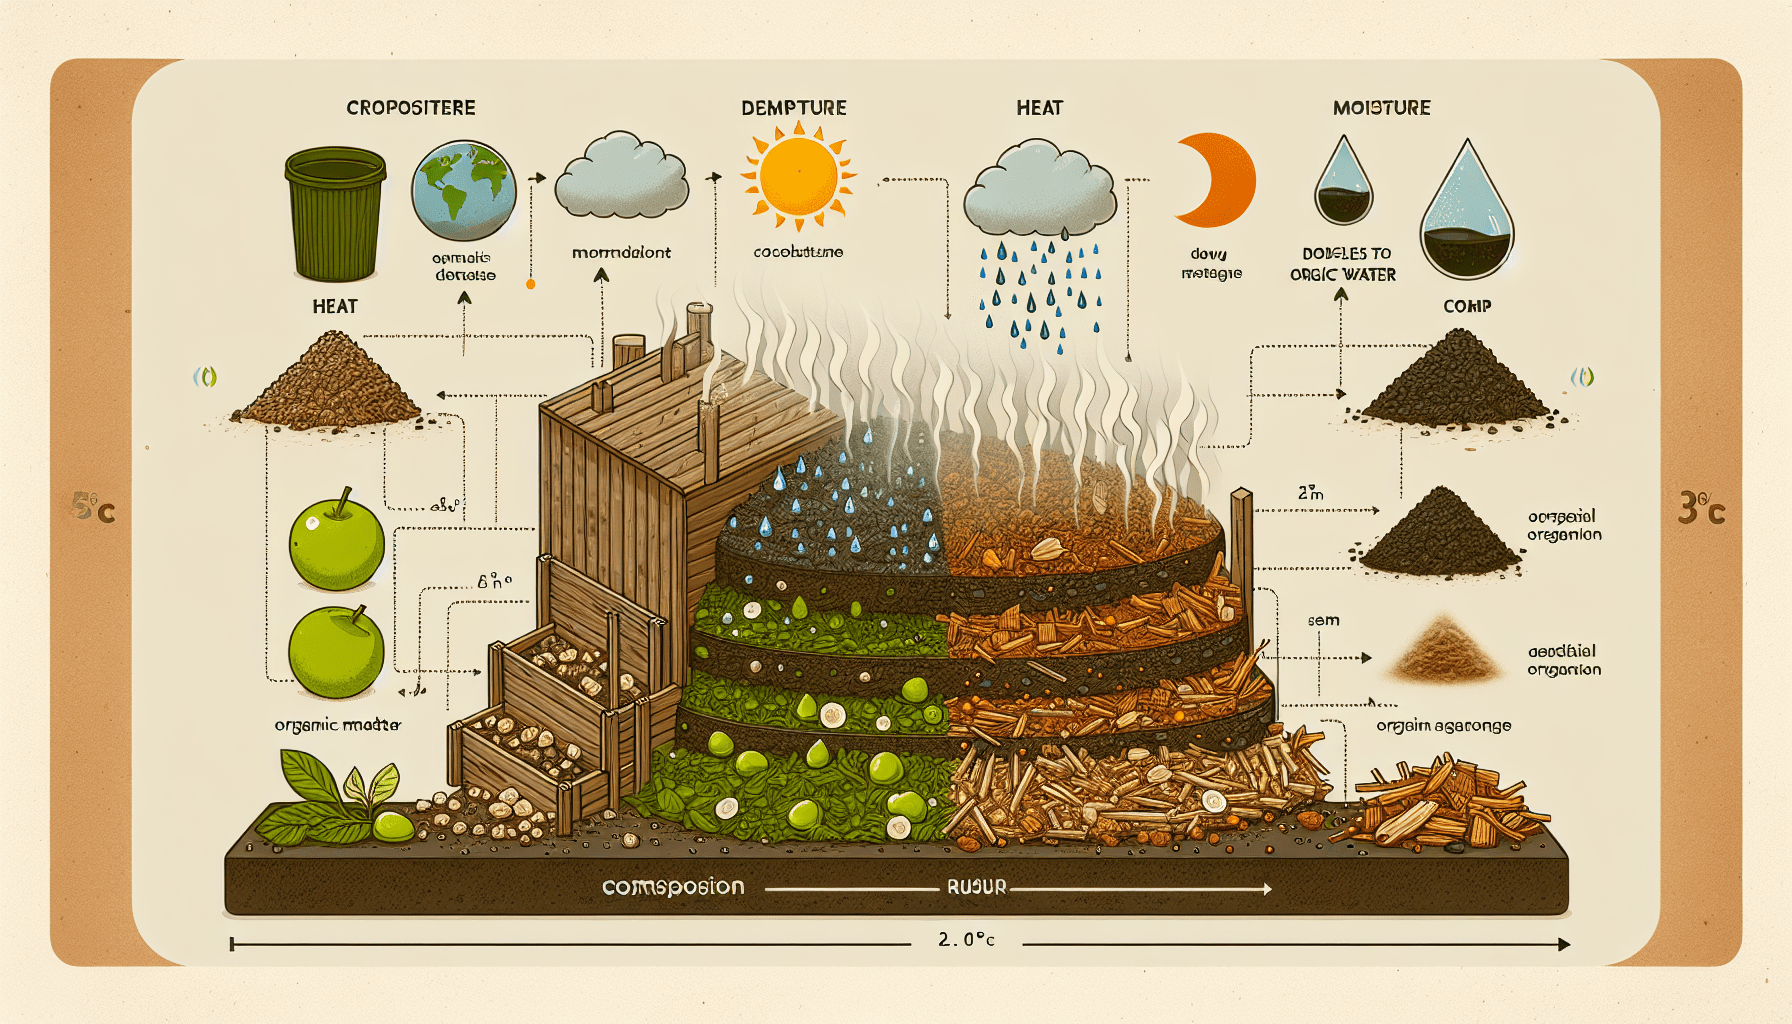 How Do Temperature And Moisture Affect Composting?